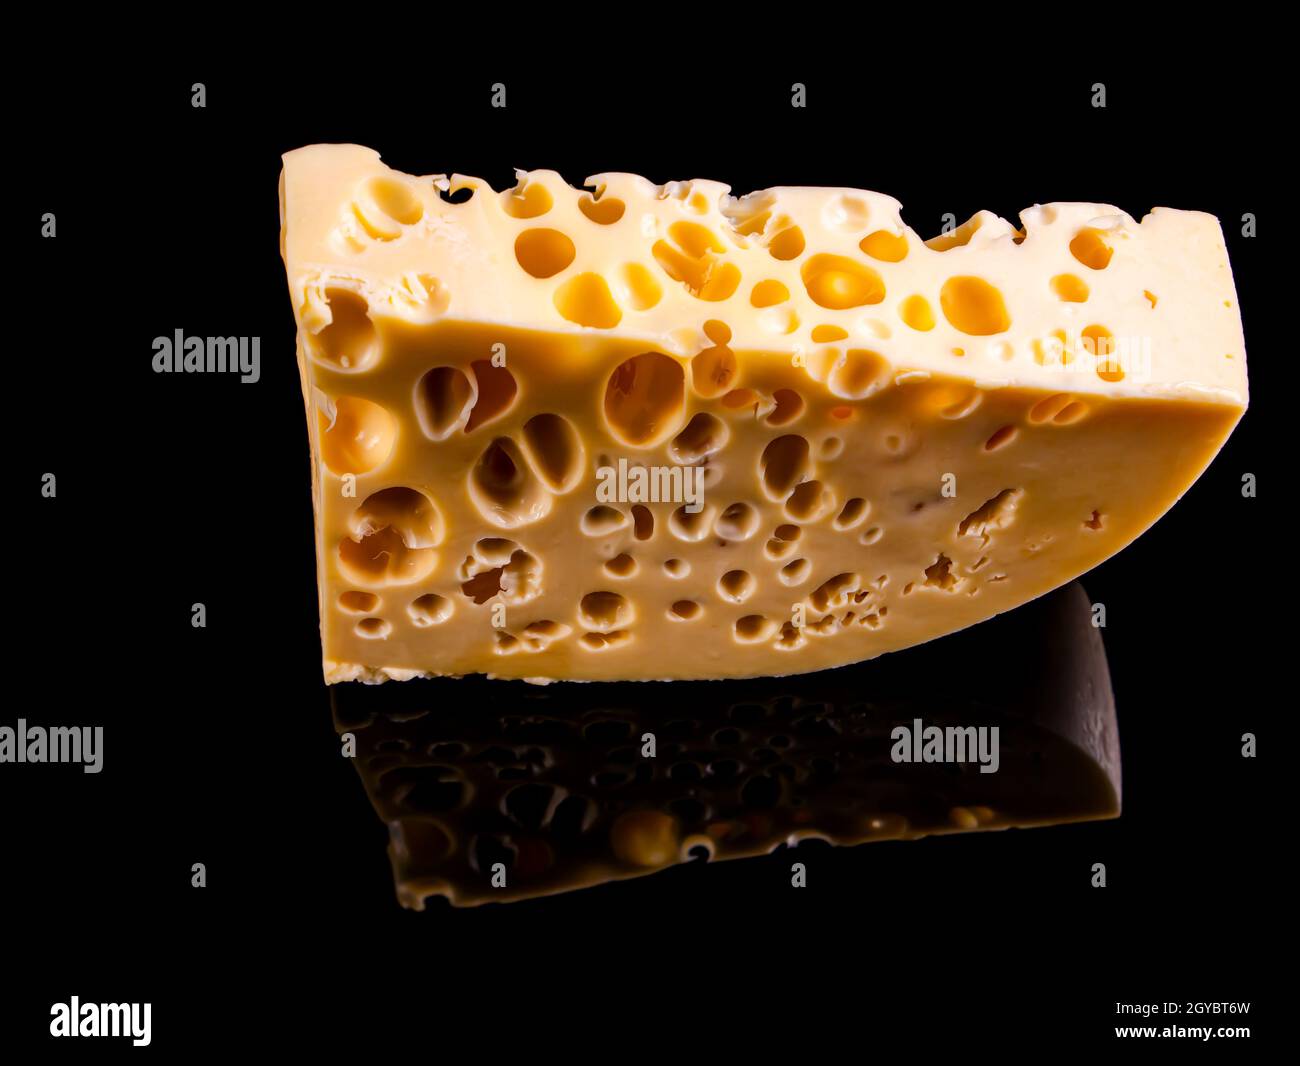 A piece of hard cheese on a black background. Hard cheeses. Milk product. Dairy products. Home kitchen. Food photo. Black background. Yellow. Healthy Stock Photo